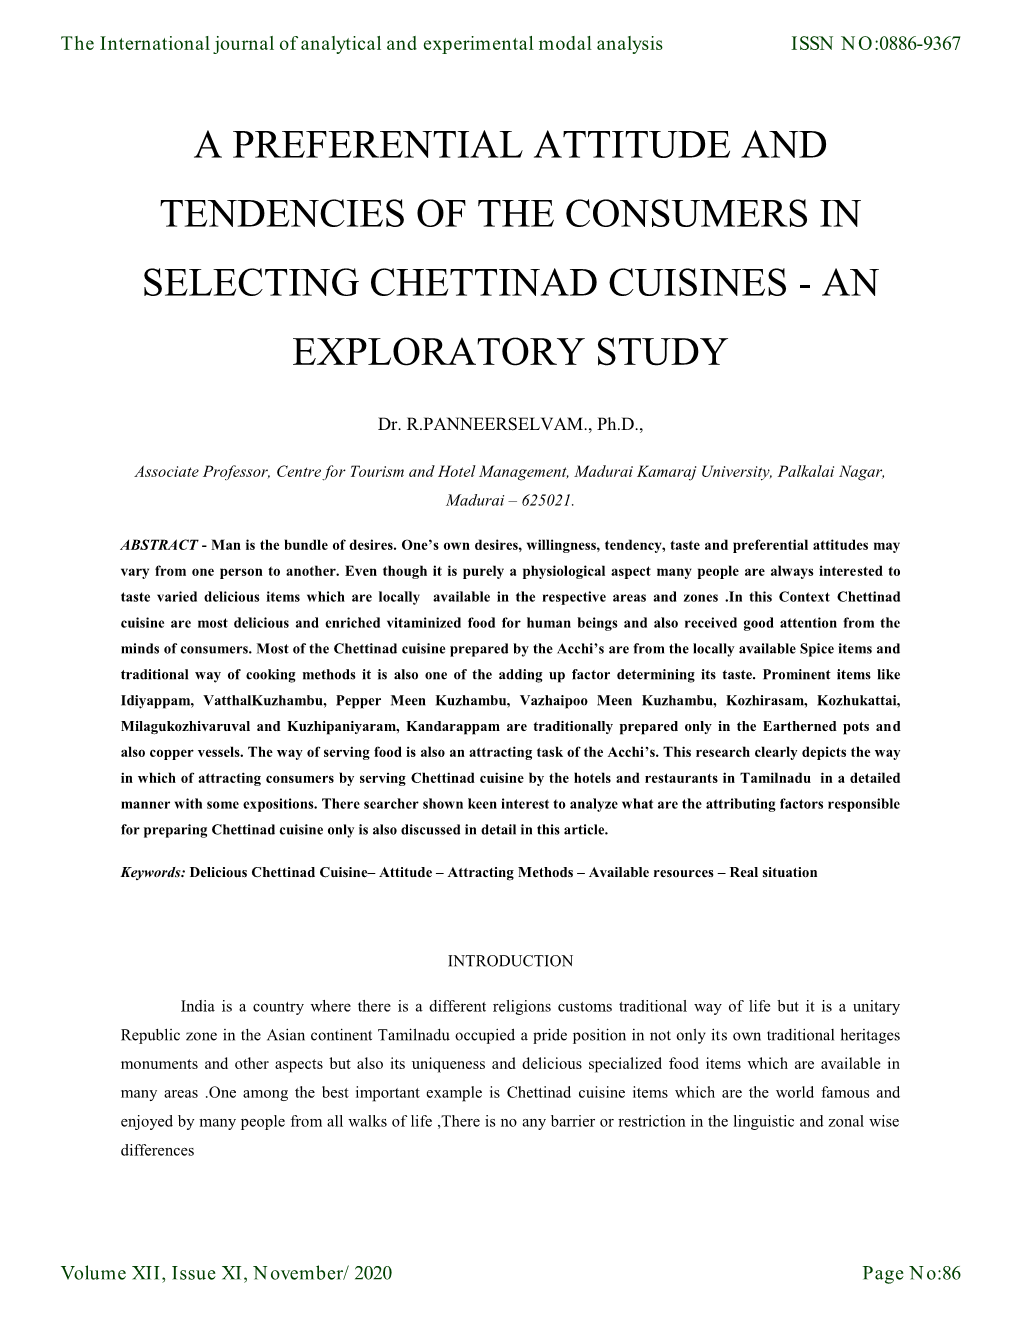 A Preferential Attitude and Tendencies of the Consumers in Selecting Chettinad Cuisines - an Exploratory Study